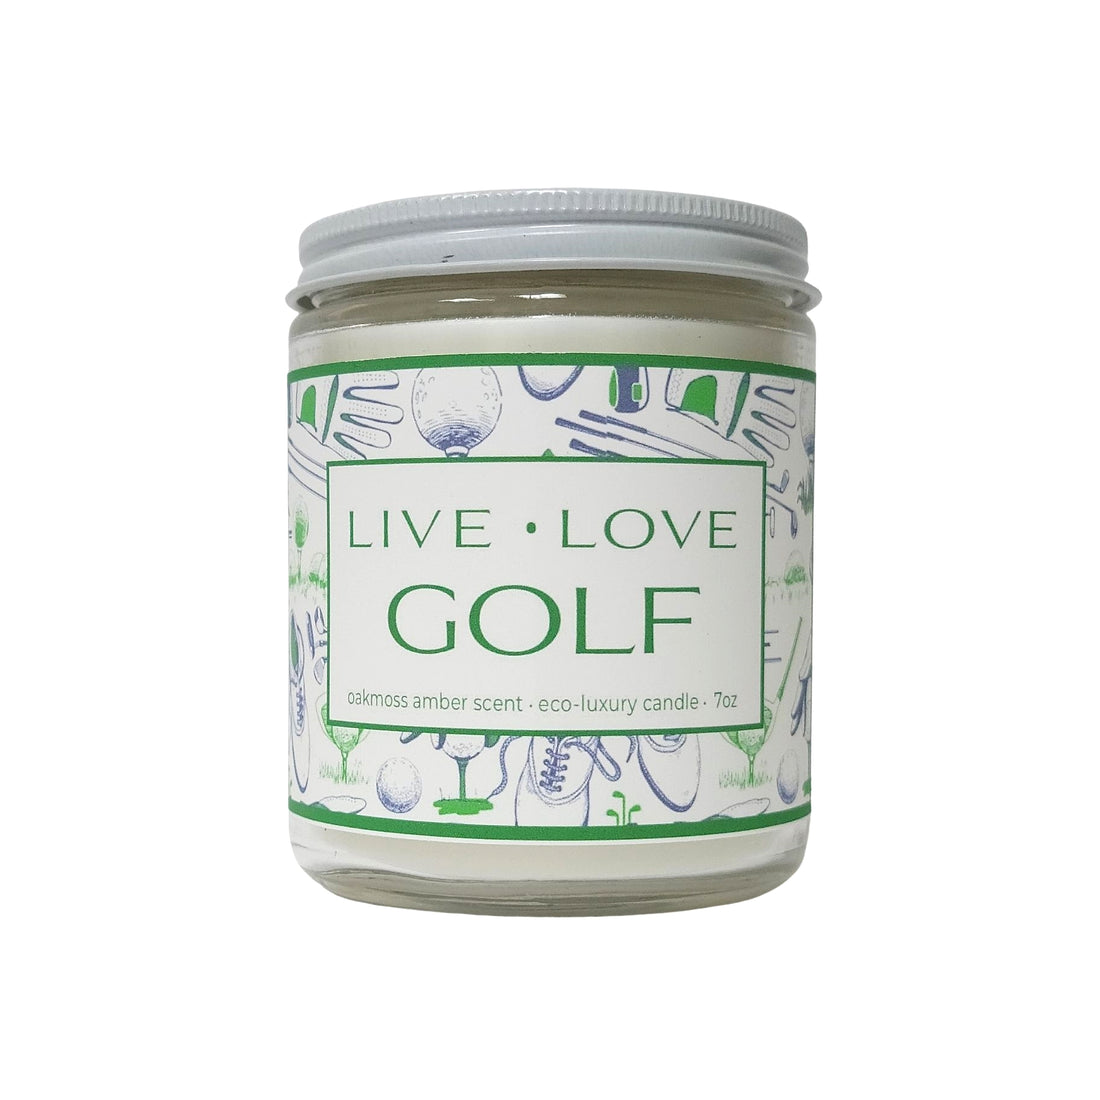 Live Love Golf 7oz Coconut Wax Candle made with coconut wax and scented with Oakmoss &amp; Amber non-toxic fragance. 